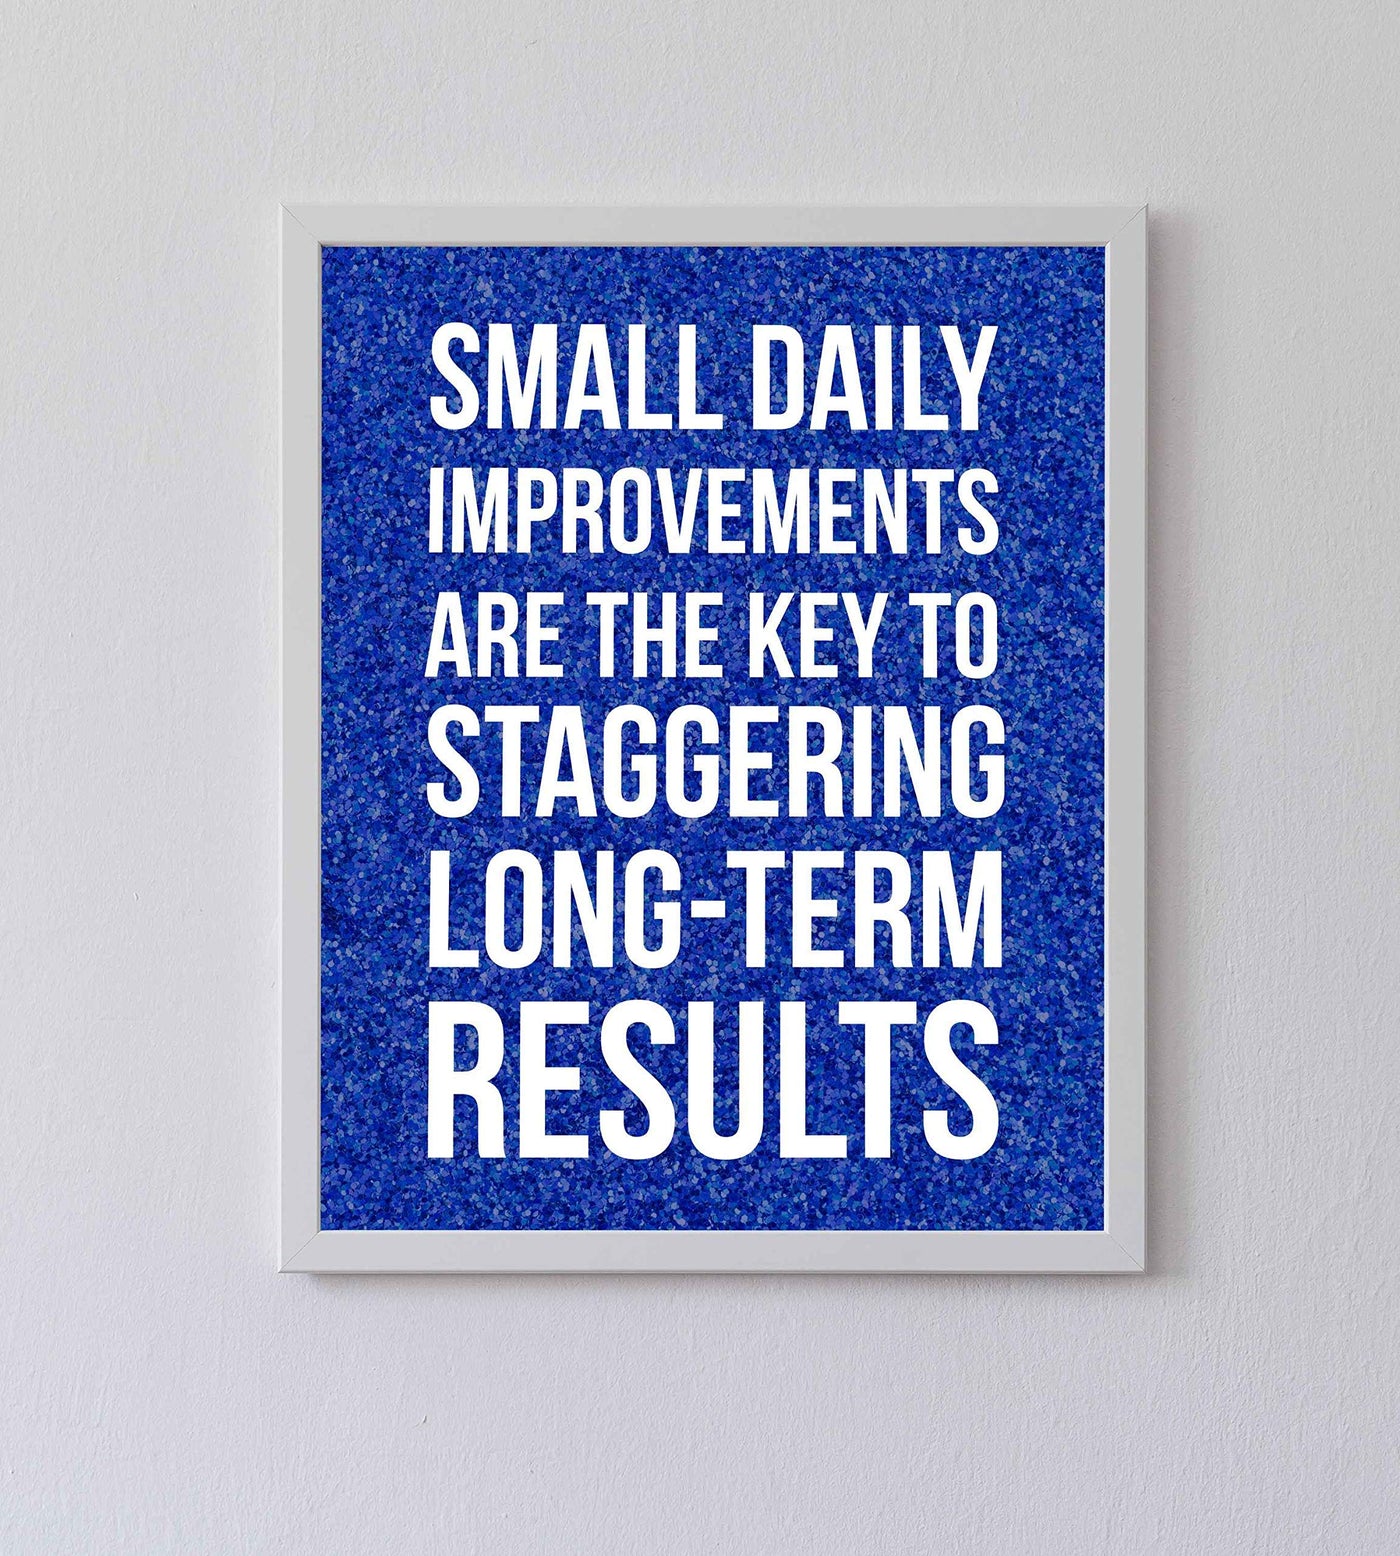 ?Small Daily Improvements-Key To Long-Term Results? Motivational Quotes Wall Art -8 x 10" Modern Poster Print-Ready to Frame. Inspirational Home-Office-School-Gym Decor. Great Sign for Motivation!